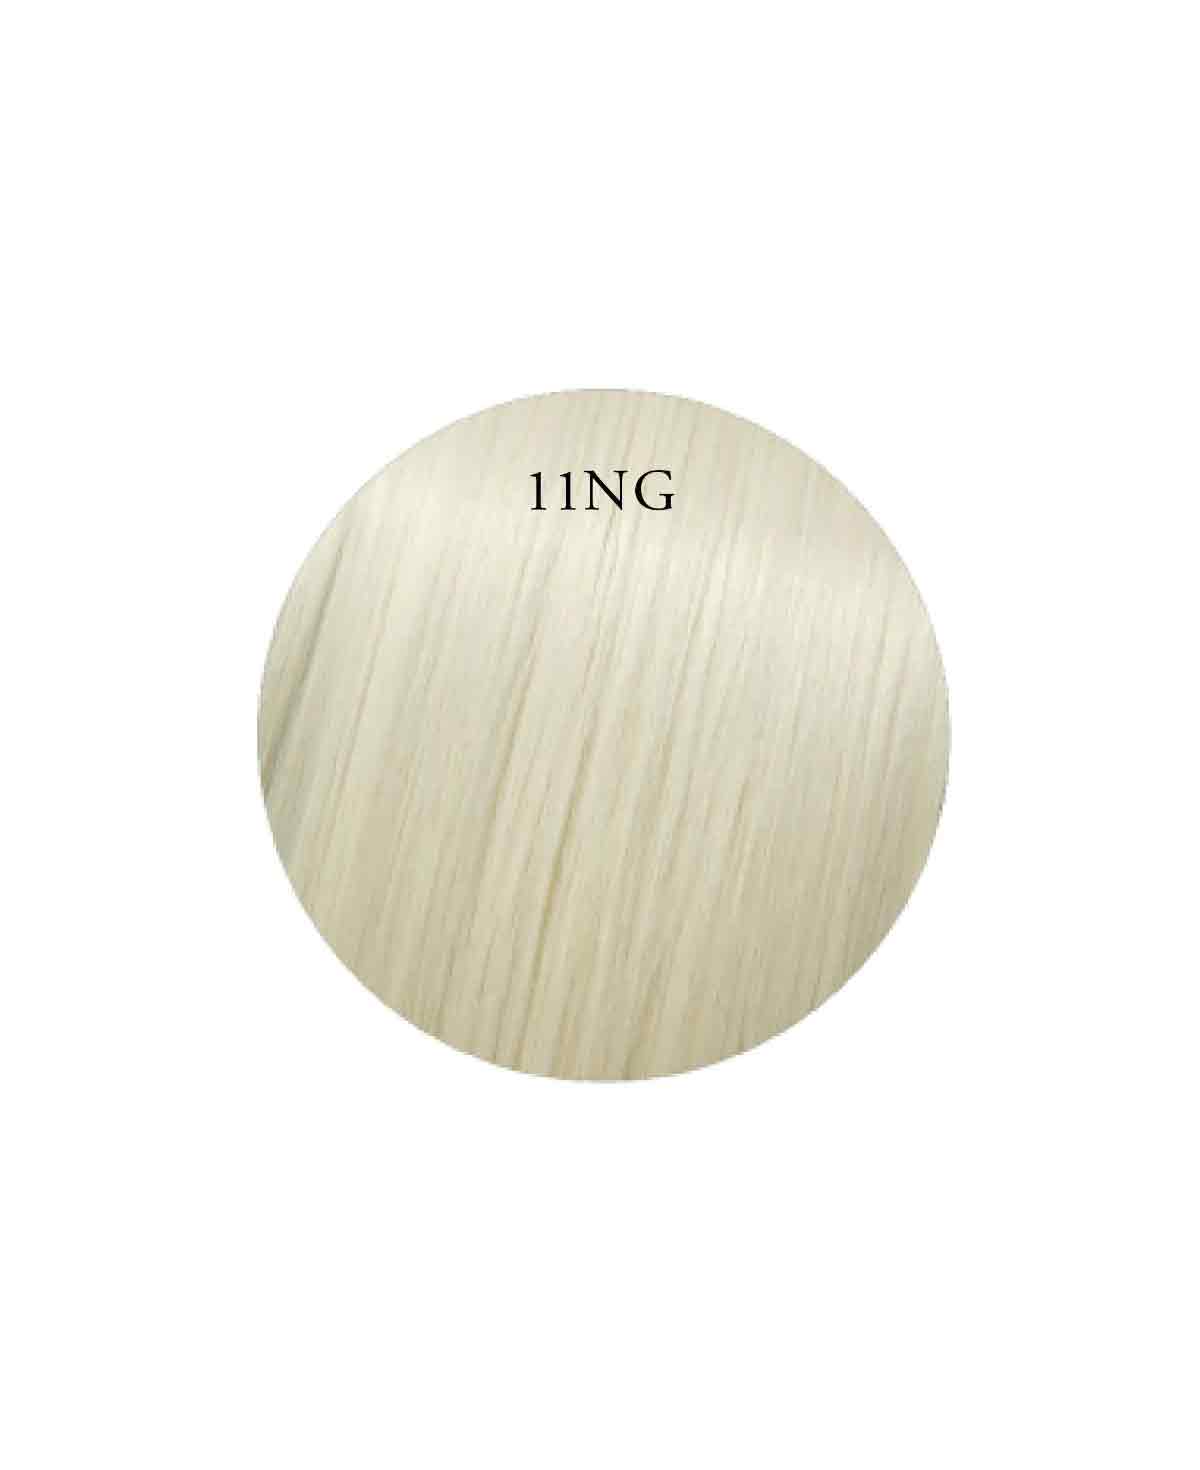 Showpony 45-50cm (20") 7 Piece Clip In Hair Extension - 11NG Silver Blonde